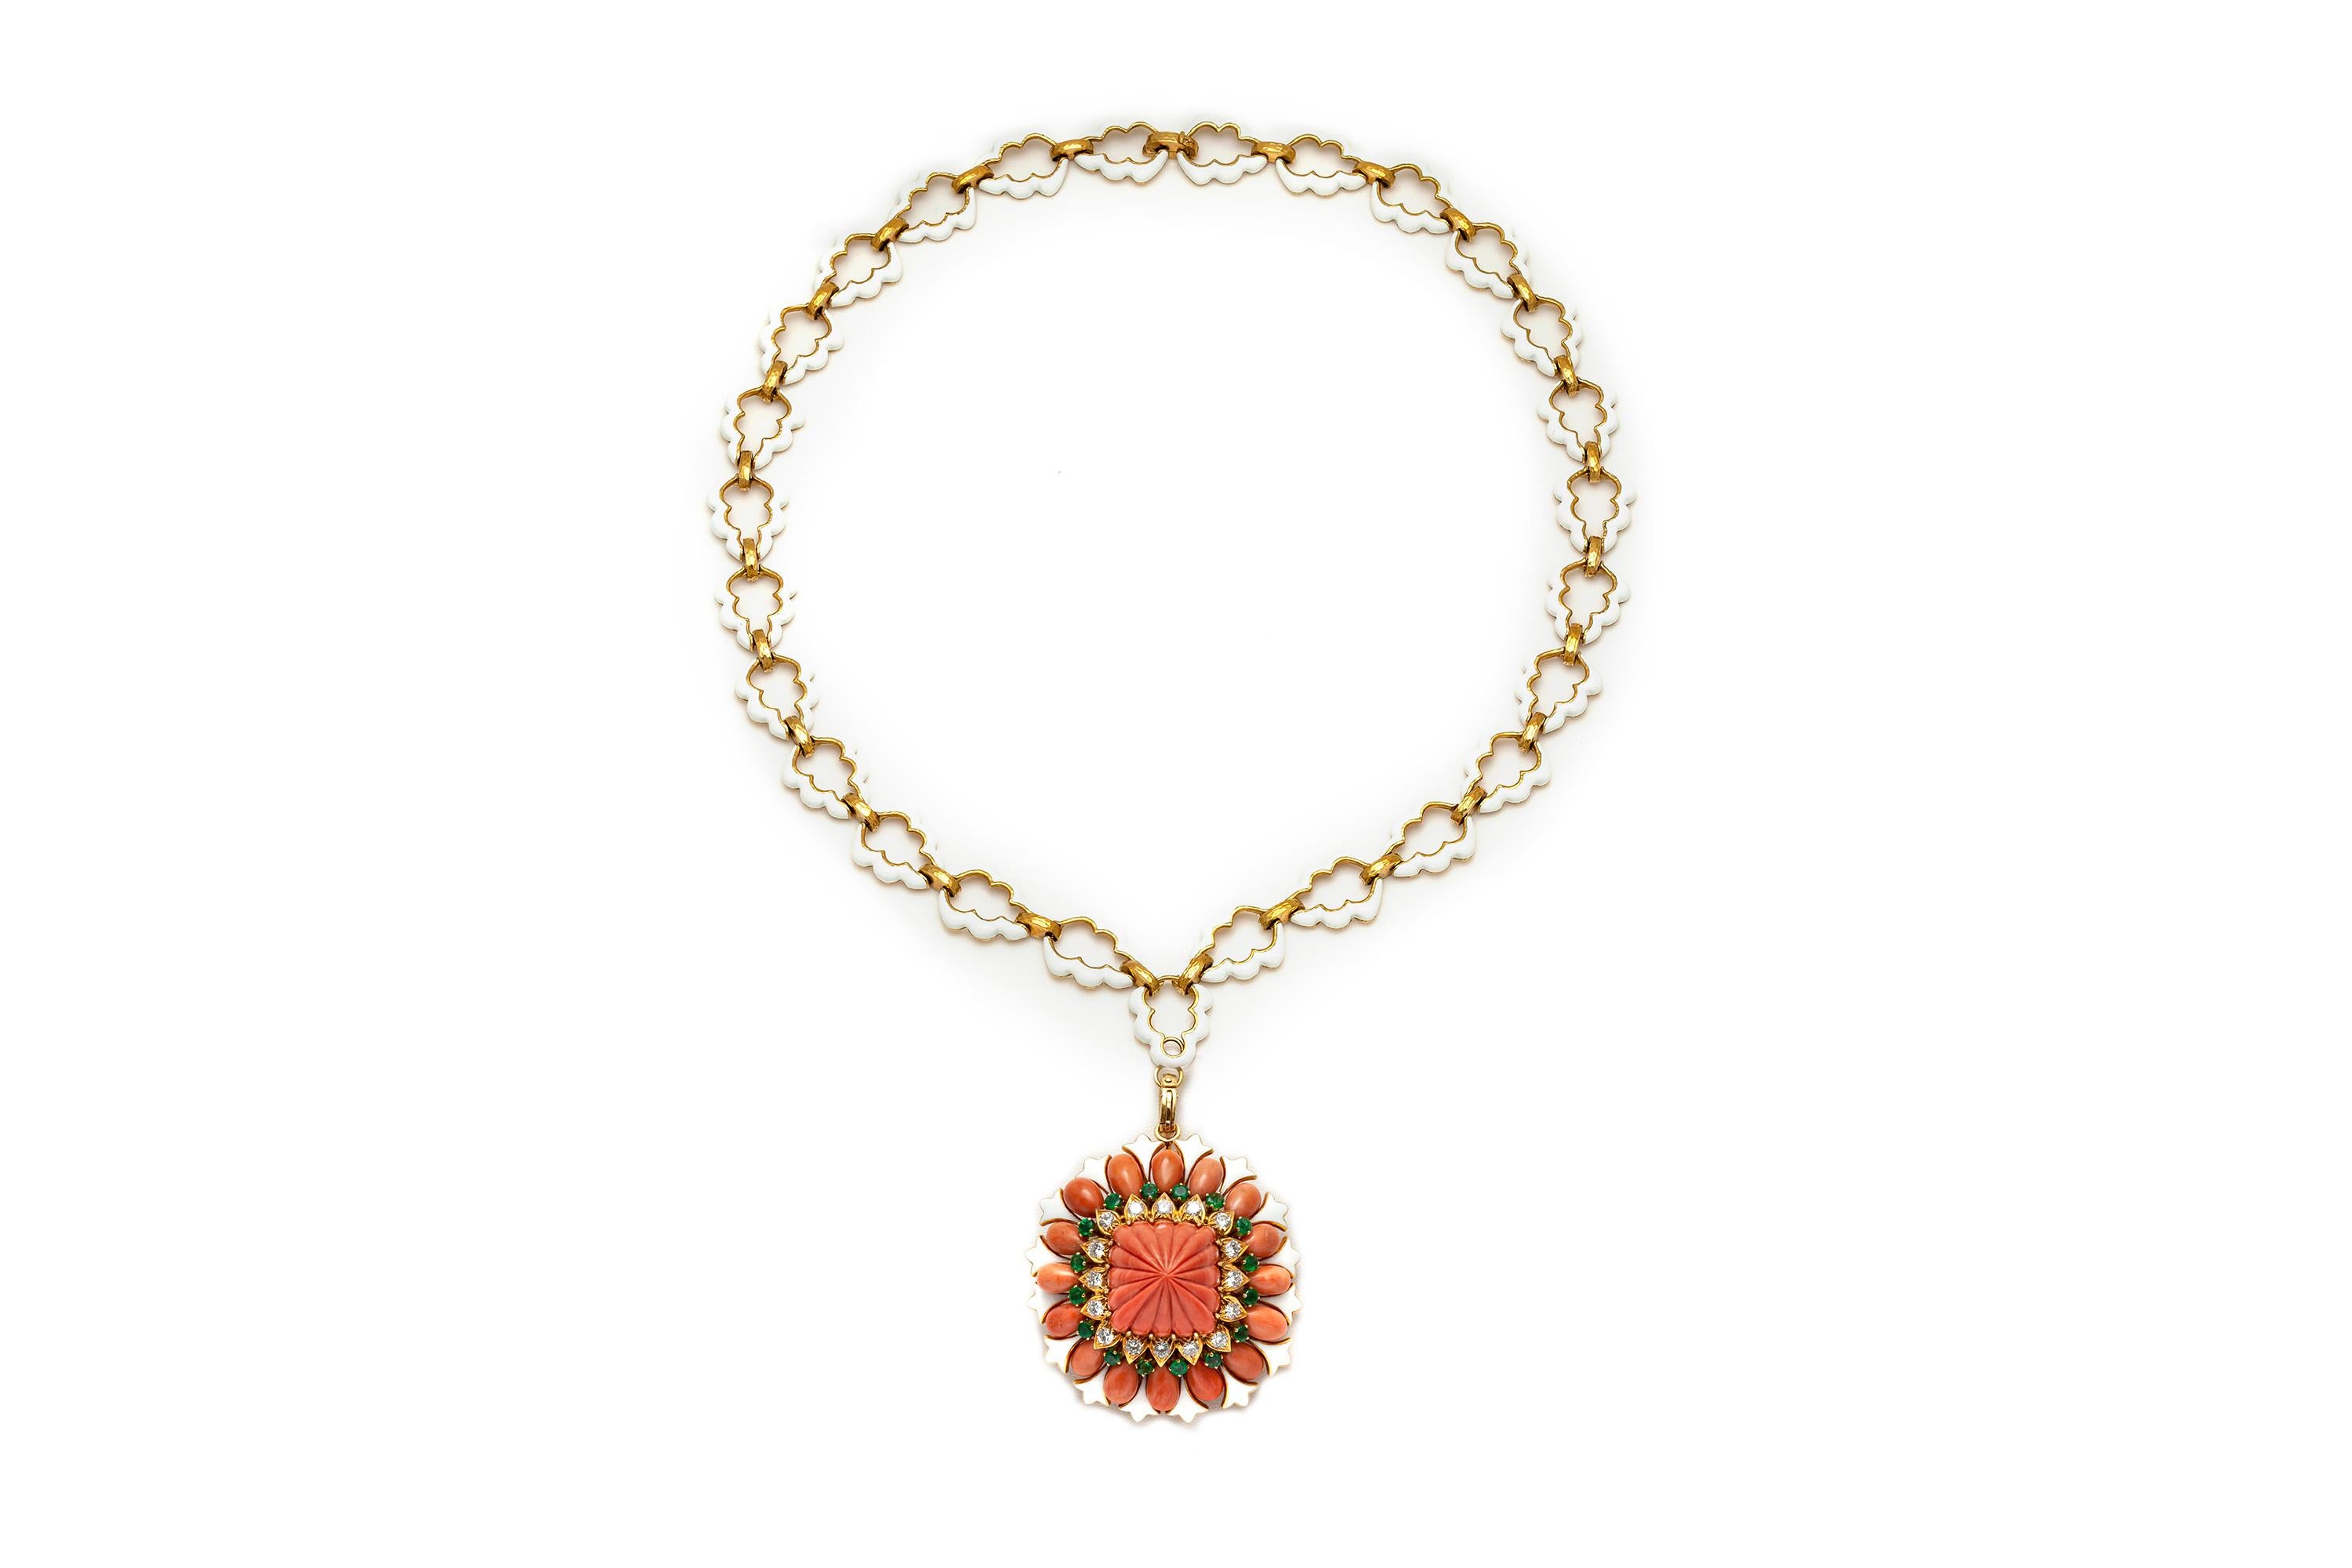 Finely crafted in 18k yellow gold and white enamel with carved Coral, Round Brilliant cut Diamonds weighing approximately a total of 4.00 carats, and Round cut Emeralds weighing approximately a total of 5.00 carats.
Signed by David Webb
The pendant